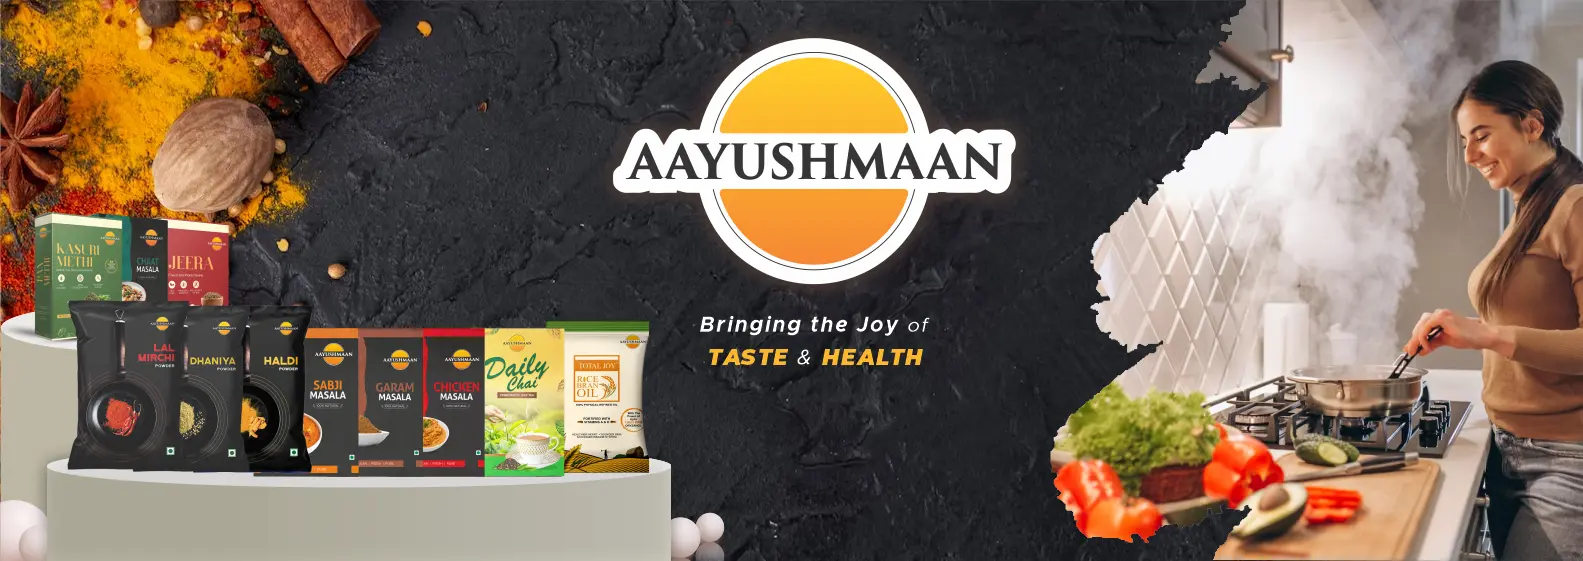 Aayushman- Buy Indian spices